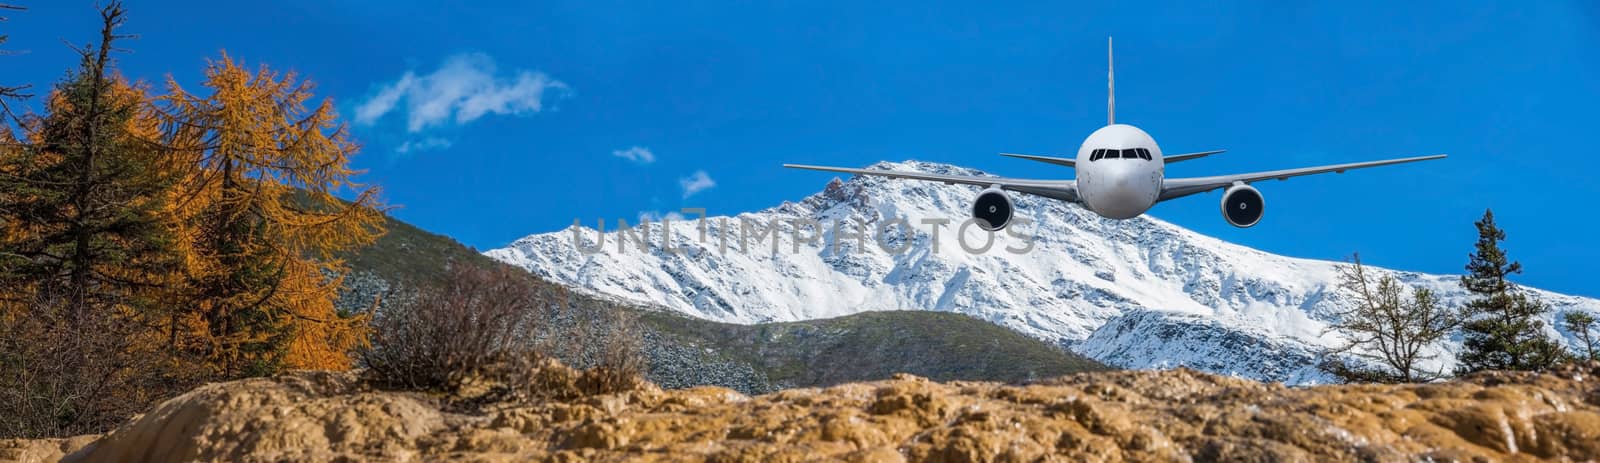 Airplane frying over the Snow Mountain background by Surasak